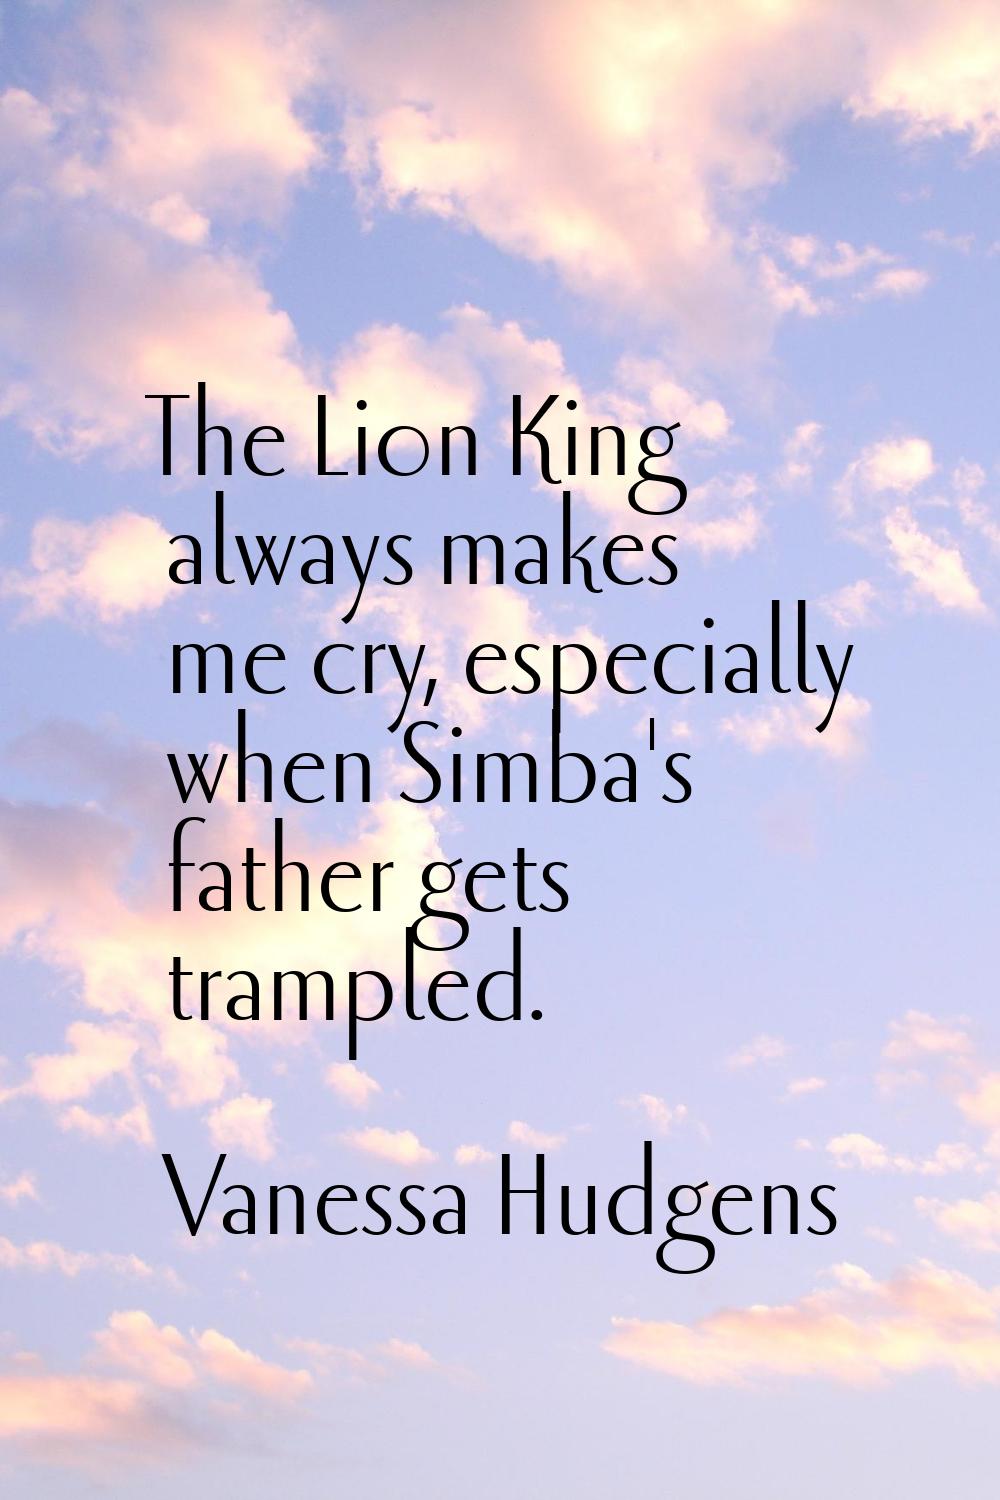 The Lion King always makes me cry, especially when Simba's father gets trampled.